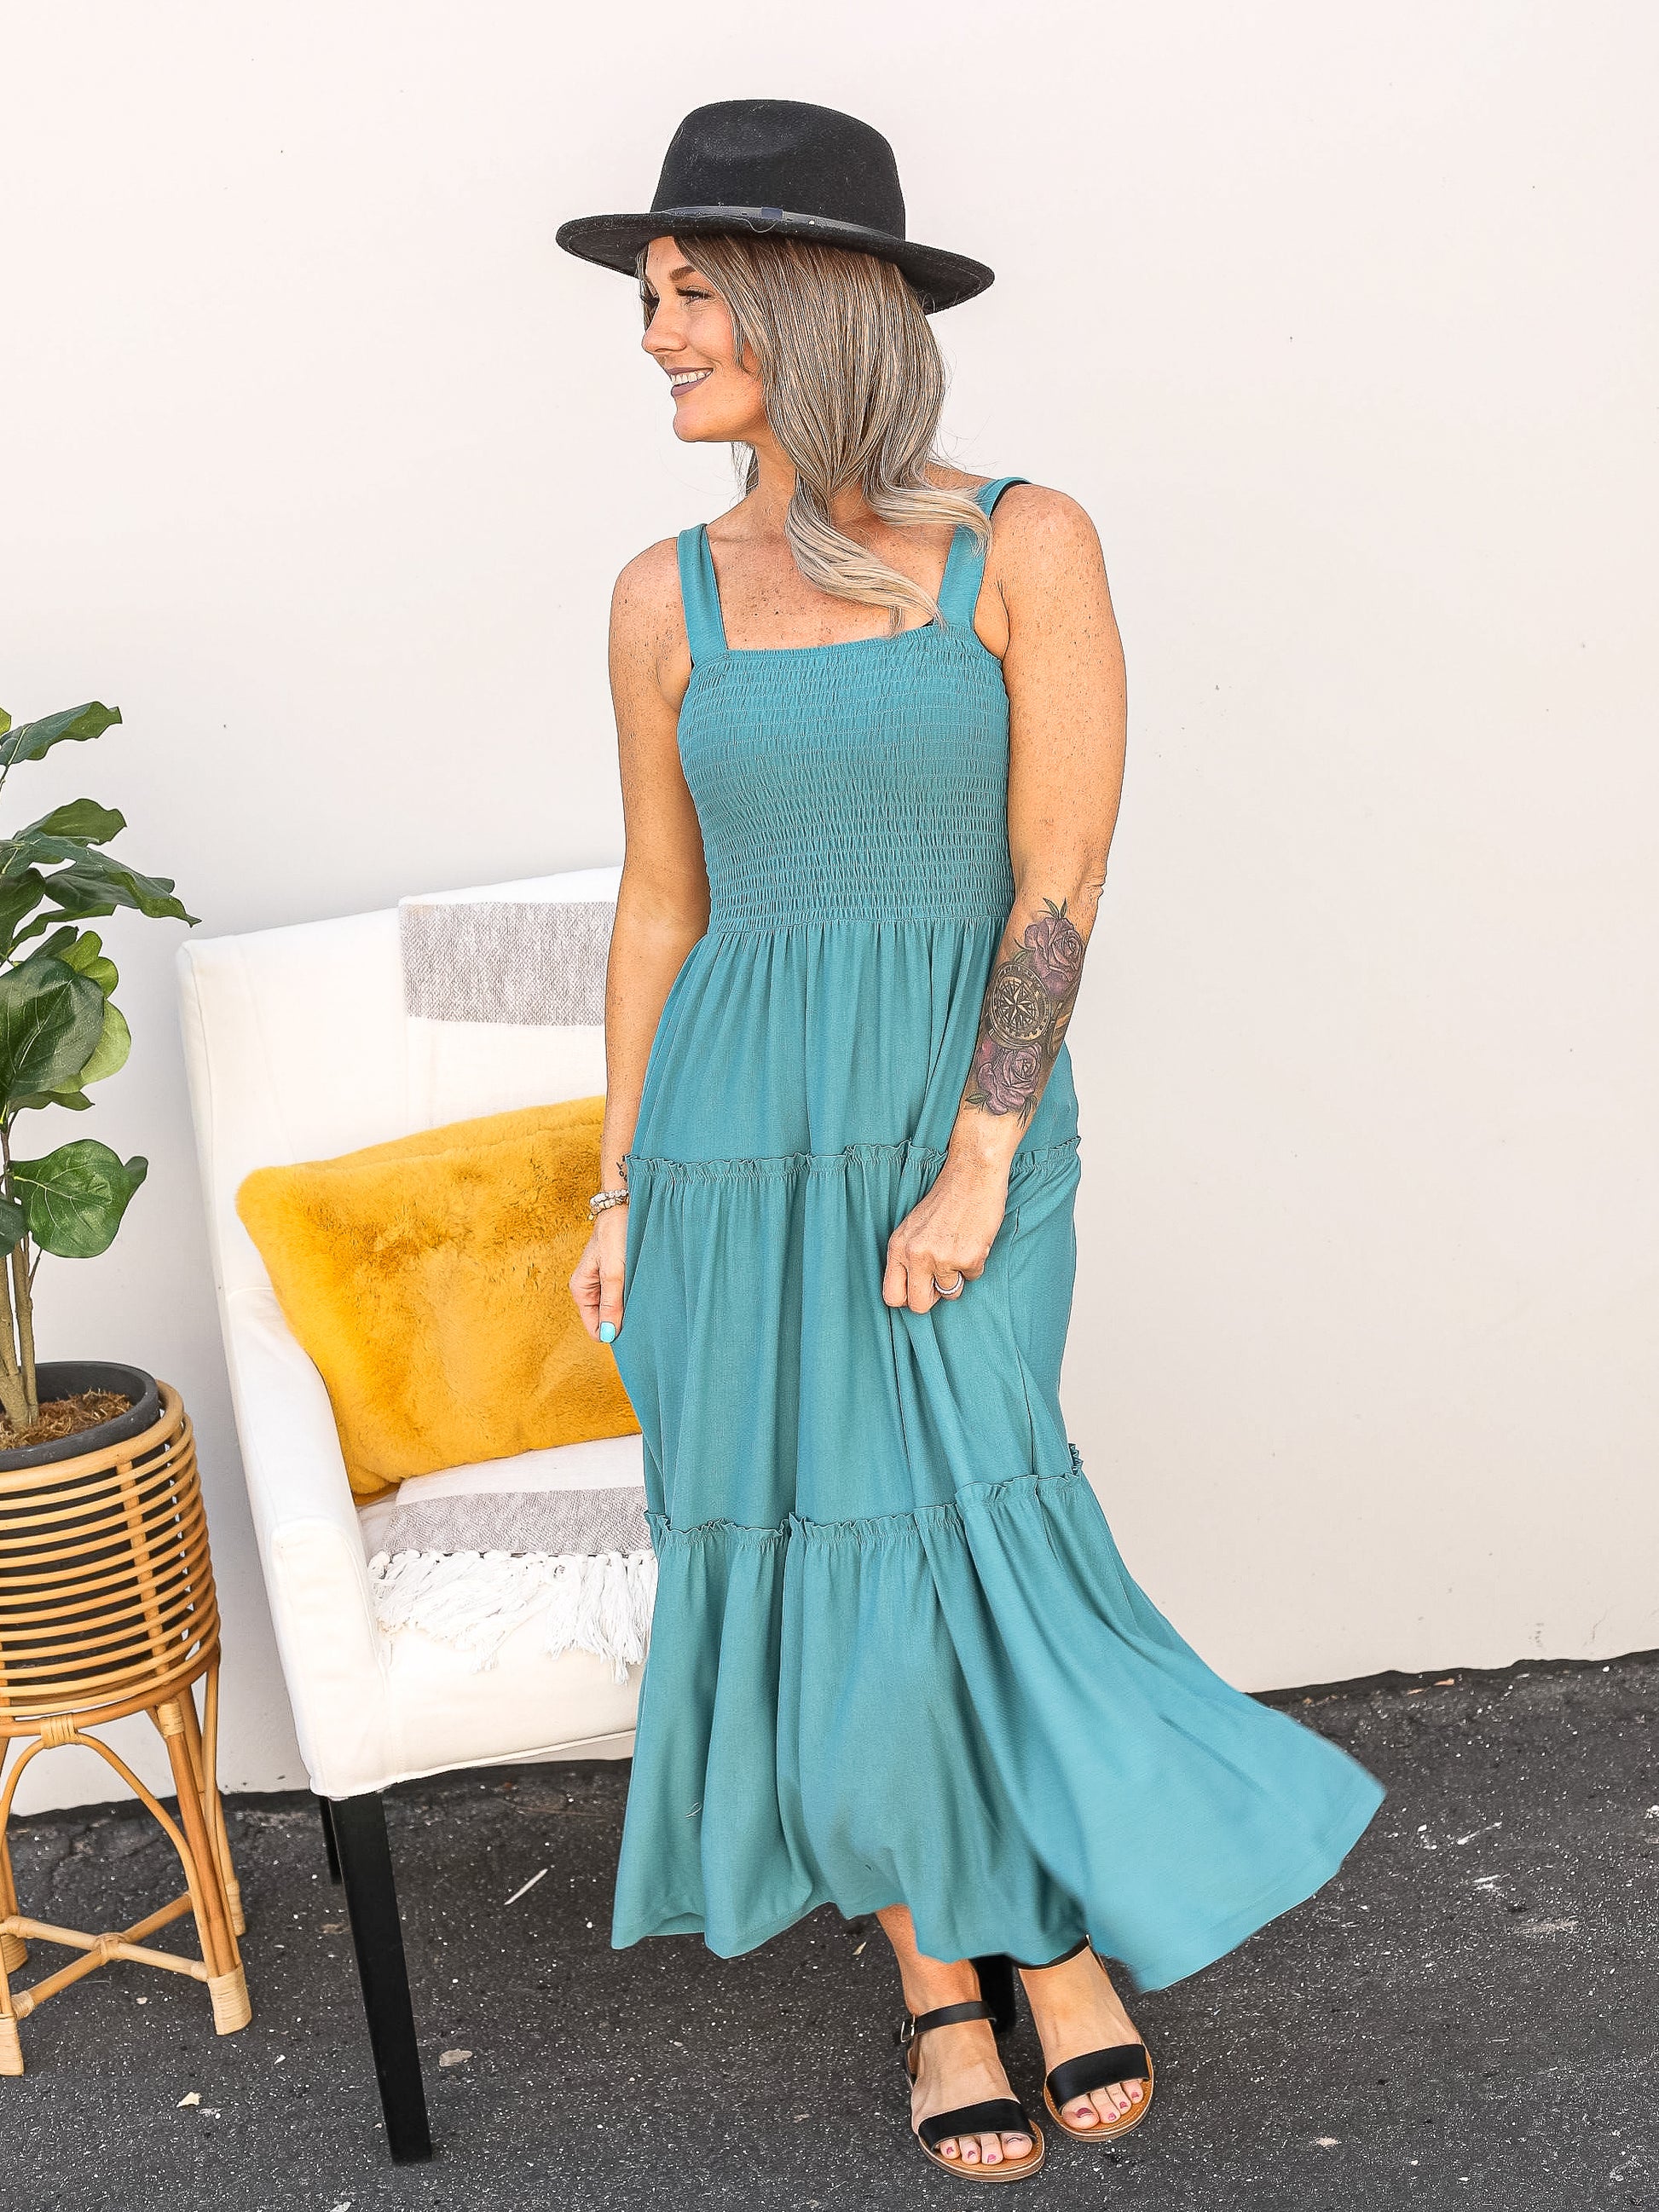 Teal colored midi sleeveless dress with smocking at the top.